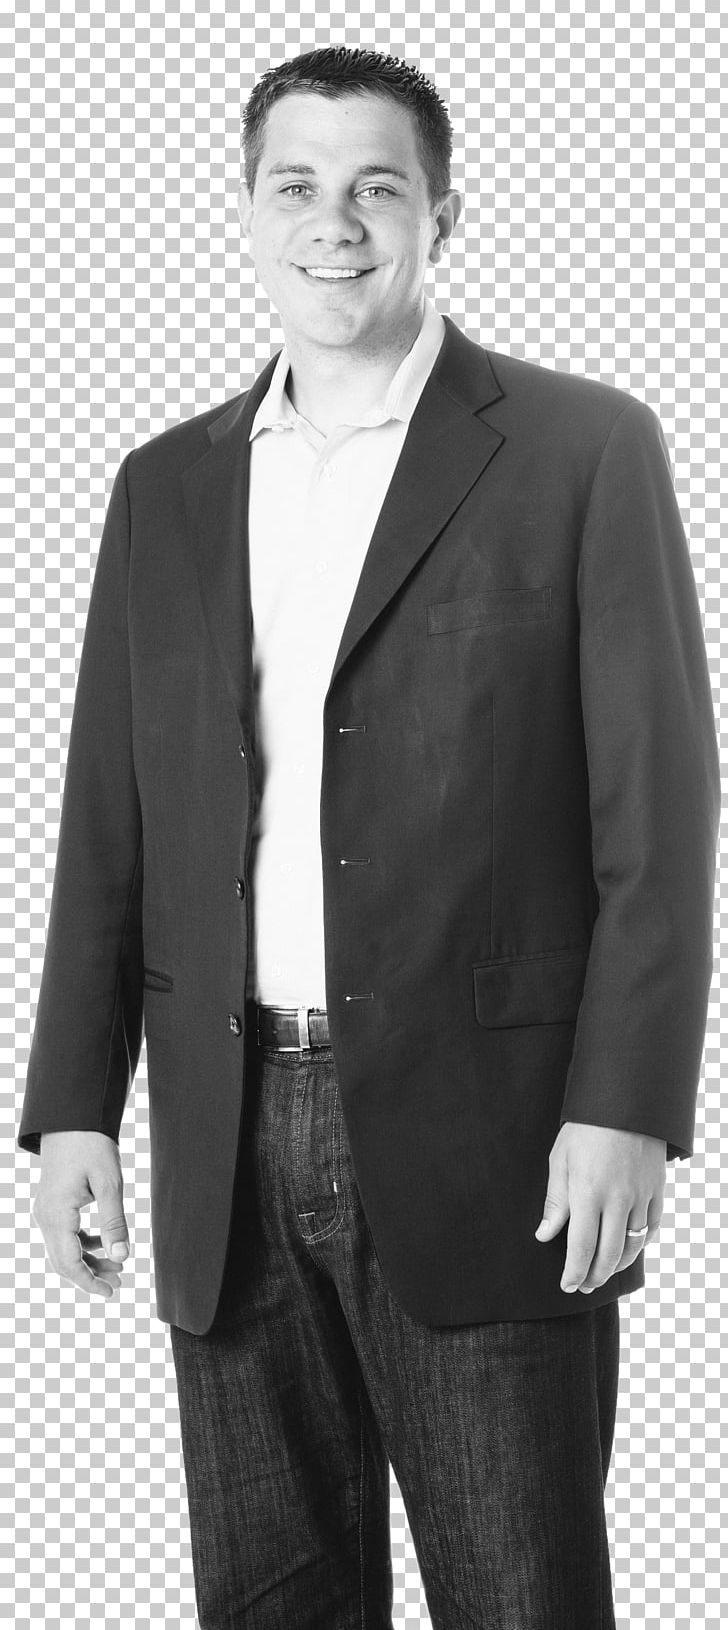 Business Executive Black White Tuxedo M. PNG, Clipart, Black, Black And White, Blazer, Business, Business Executive Free PNG Download